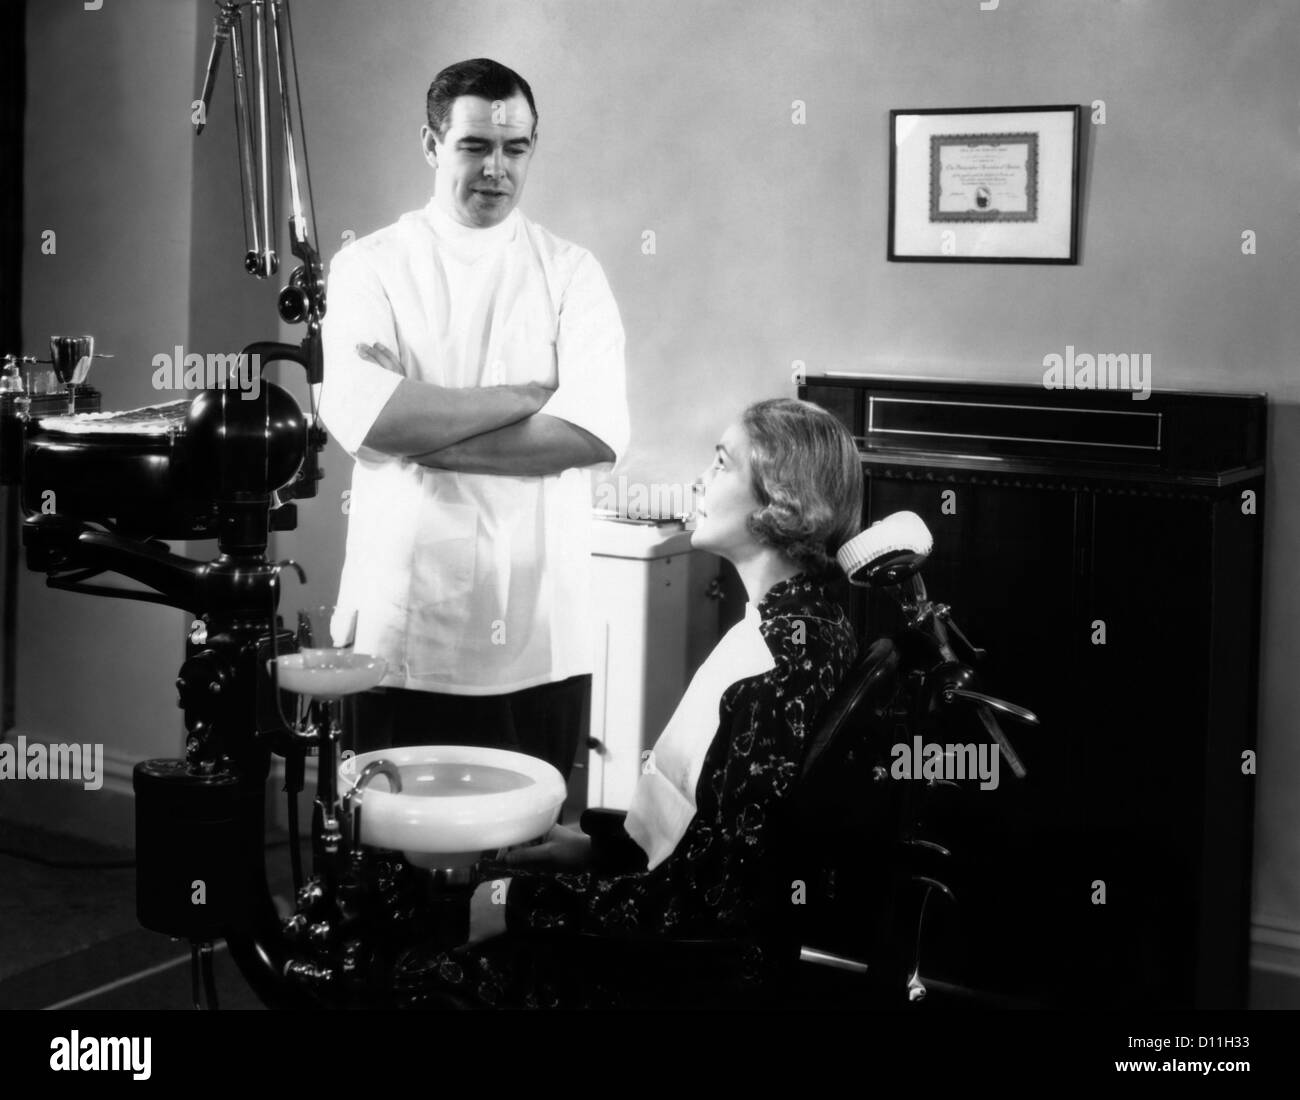 1930s 1940s MAN DENTIST ARMS CROSSED TALKING TO WOMAN PATIENT SITTING IN DENTAL CHAIR Stock Photo